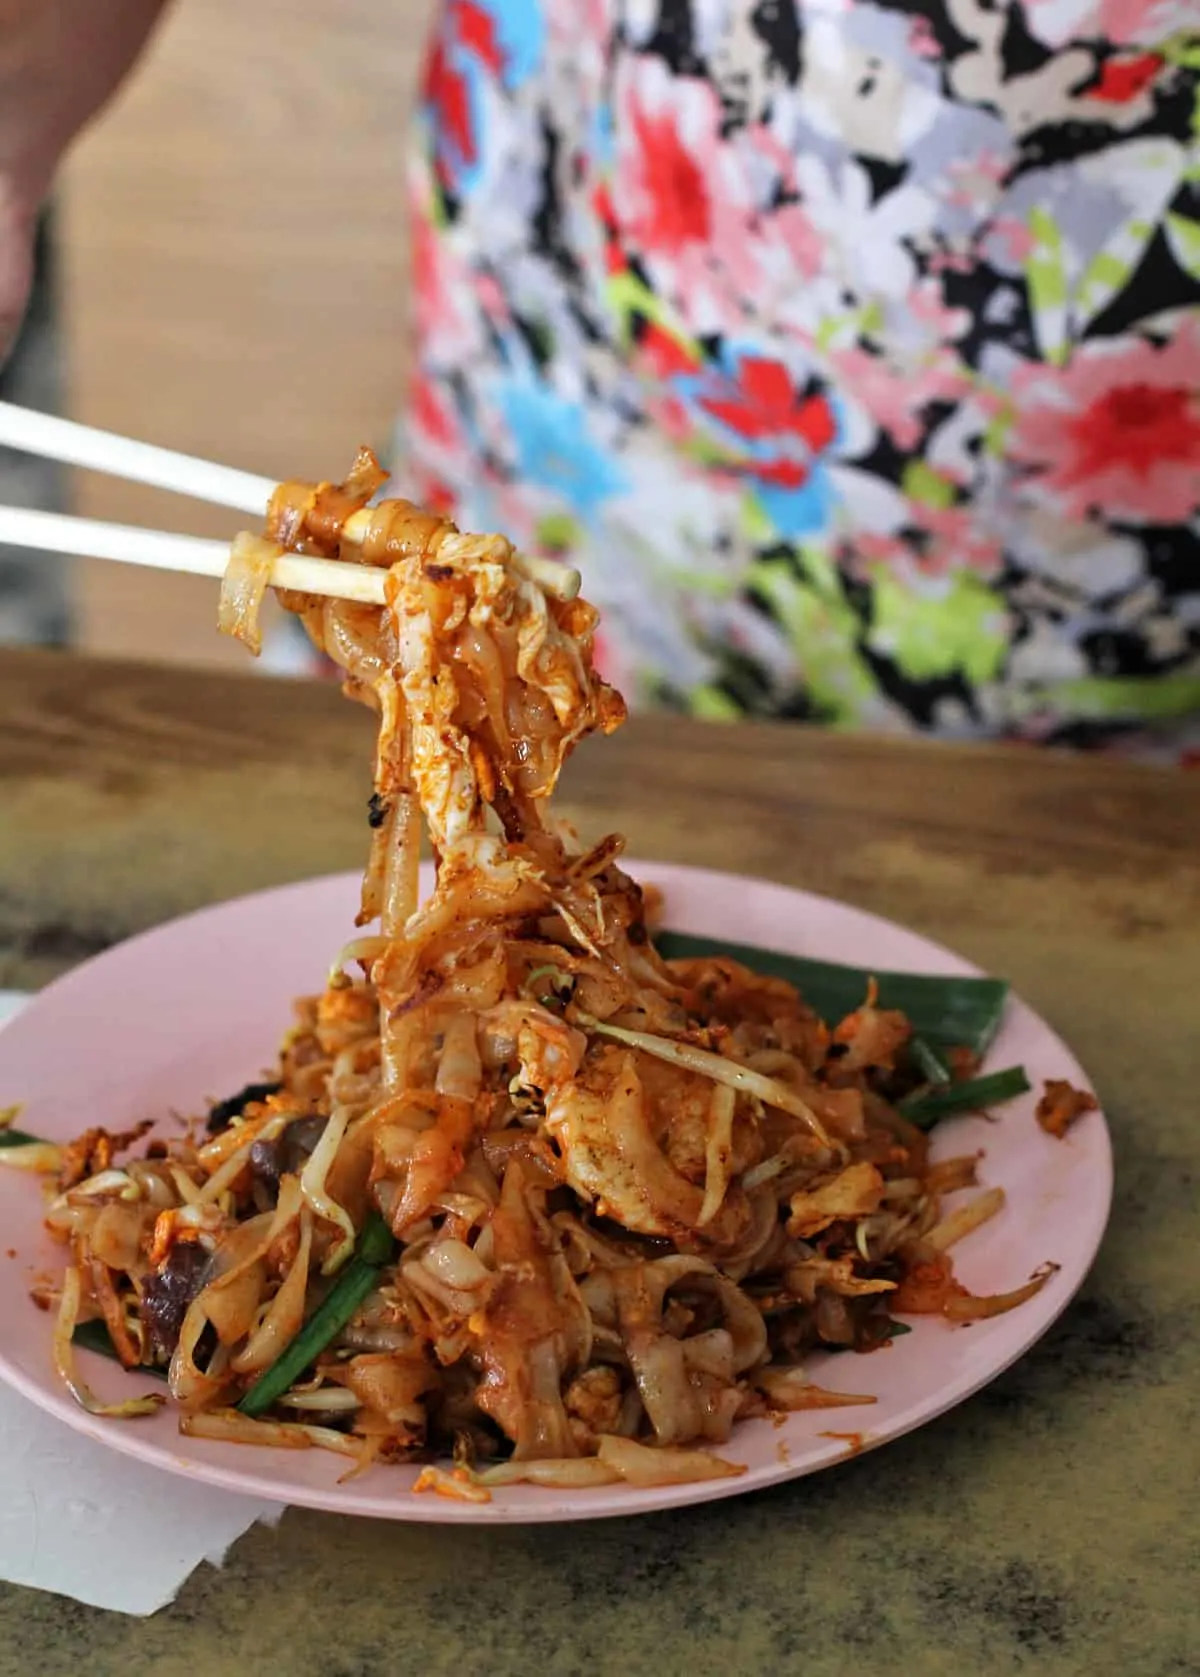 Char koay teow in Penang, Malaysia